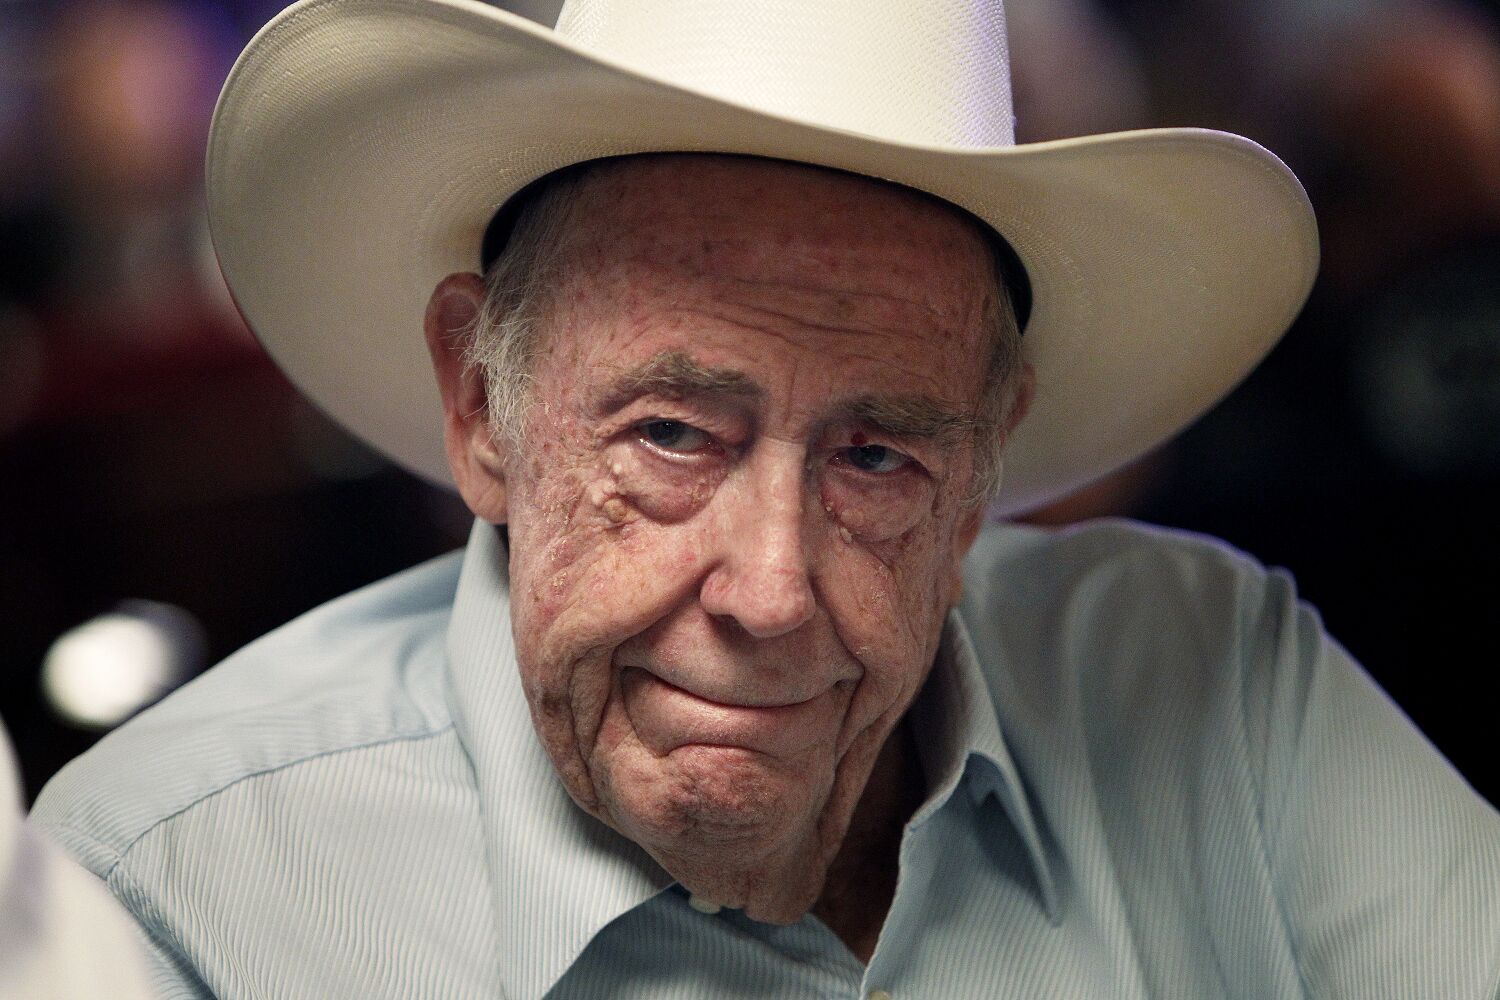 Doyle Brunson, the 'Godfather of Poker' and two-time world champ, dies at 89